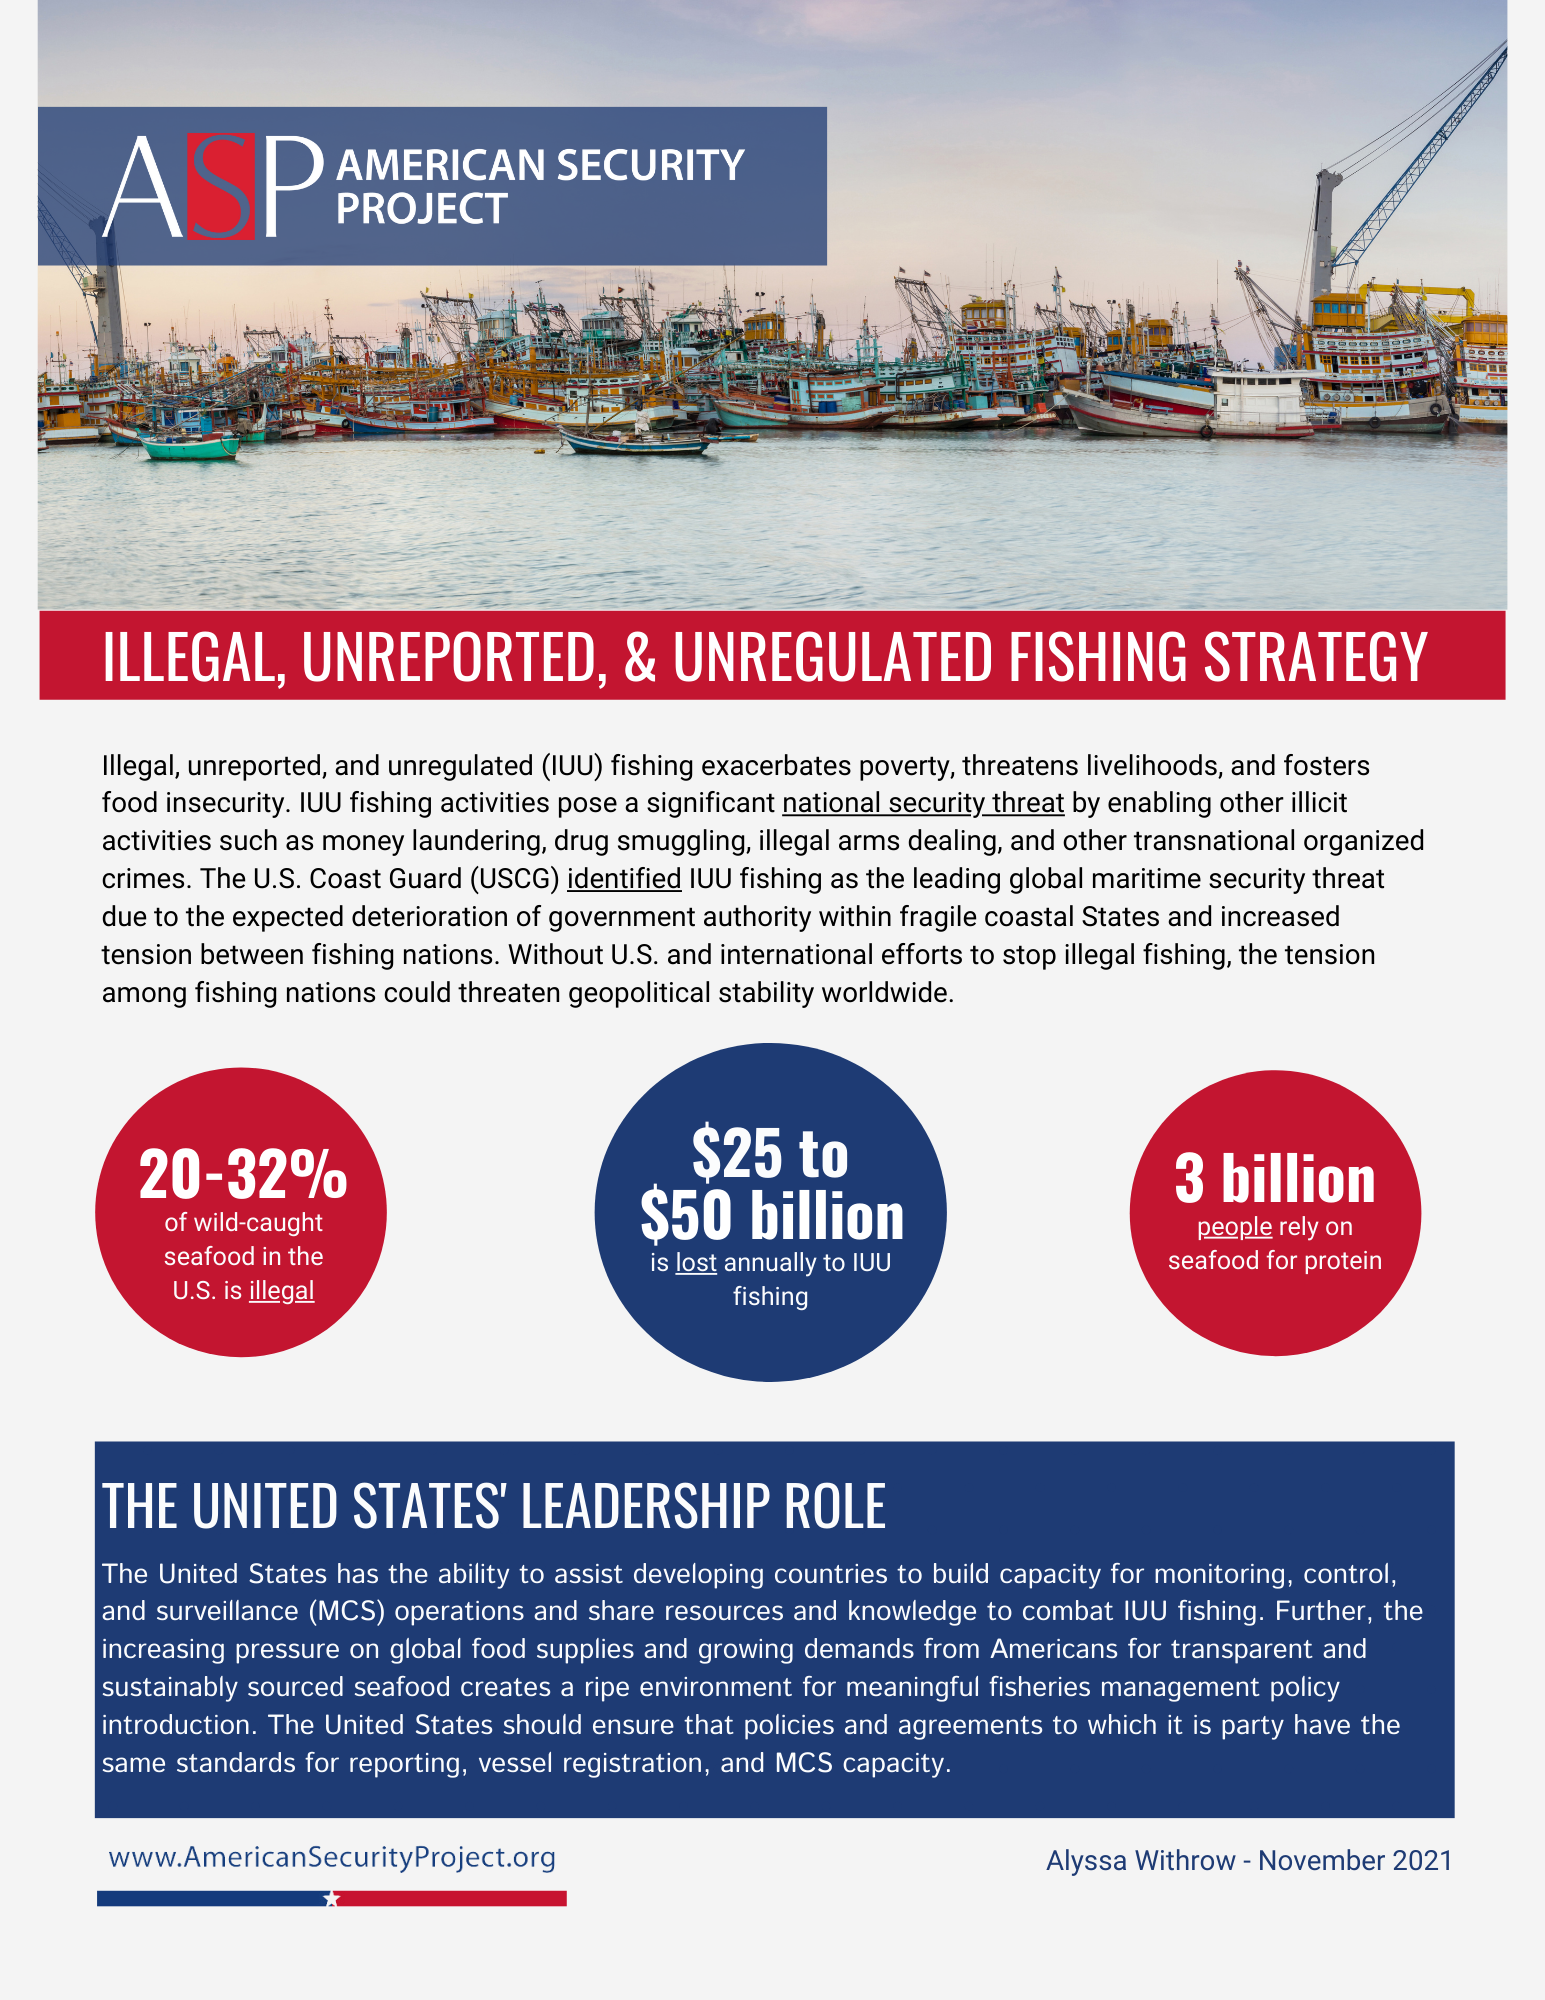 Briefing Note – Illegal, Unreported, and Unregulated Fishing Strategy